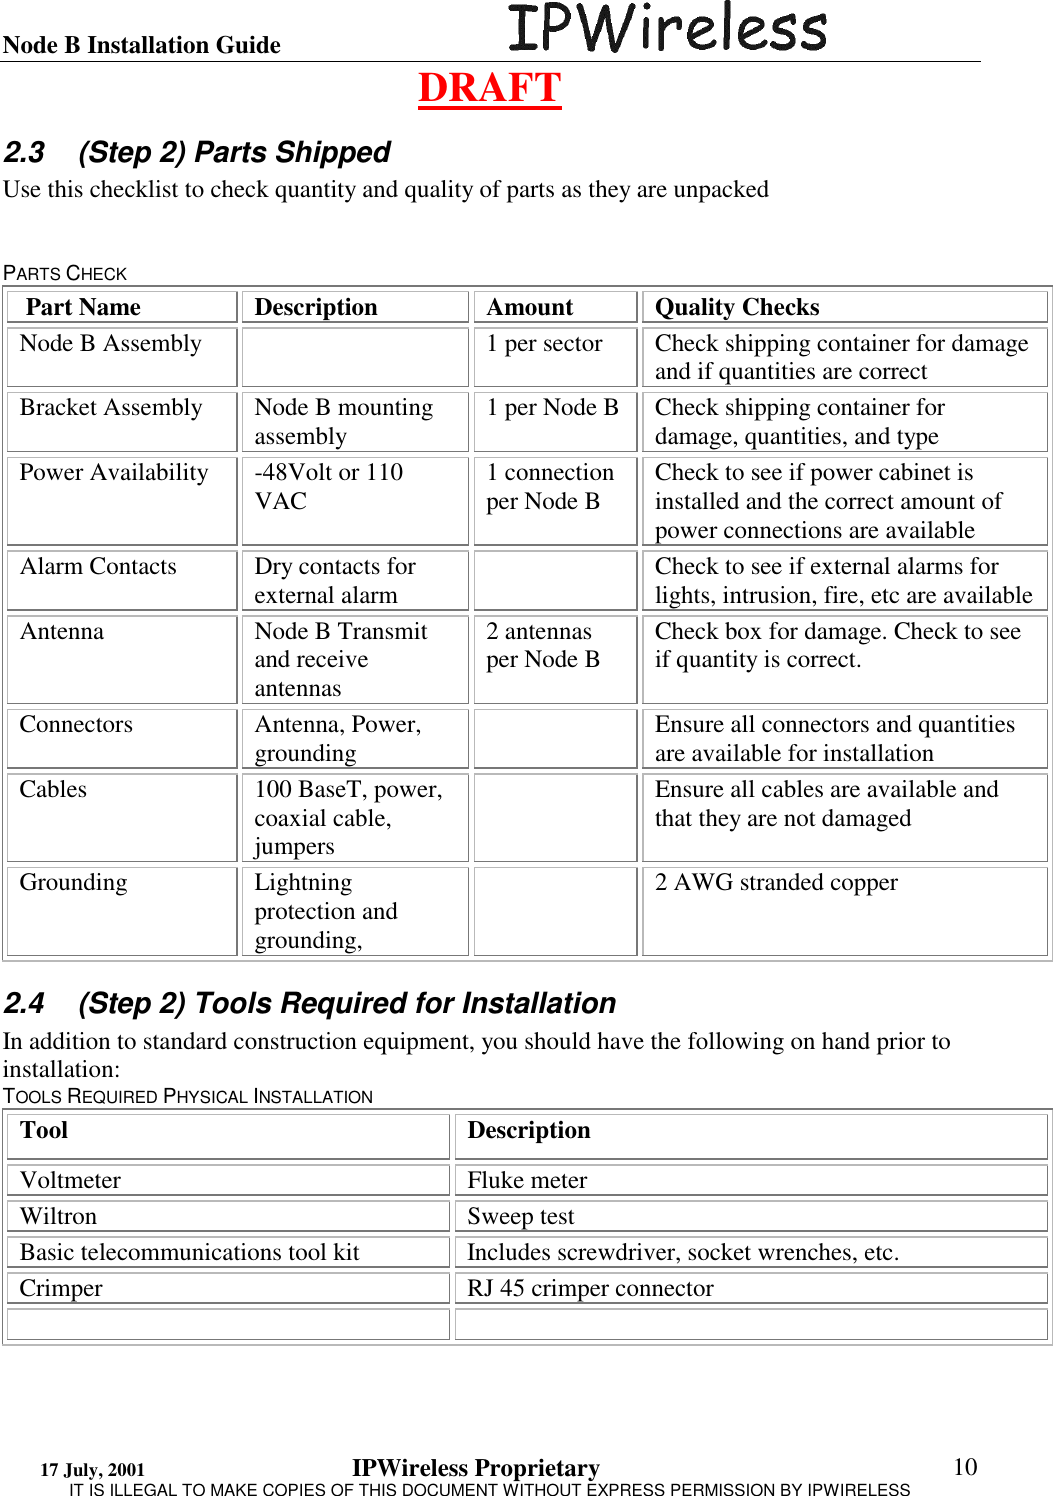 Node B Installation Guide                                      DRAFT 17 July, 2001                                 IPWireless Proprietary                                                  IT IS ILLEGAL TO MAKE COPIES OF THIS DOCUMENT WITHOUT EXPRESS PERMISSION BY IPWIRELESS  10 2.3  (Step 2) Parts Shipped Use this checklist to check quantity and quality of parts as they are unpacked   PARTS CHECK  Part Name  Description  Amount  Quality Checks Node B Assembly    1 per sector  Check shipping container for damage and if quantities are correct Bracket Assembly  Node B mounting assembly  1 per Node B  Check shipping container for damage, quantities, and type Power Availability  -48Volt or 110 VAC  1 connection per Node B  Check to see if power cabinet is installed and the correct amount of power connections are available Alarm Contacts  Dry contacts for external alarm    Check to see if external alarms for lights, intrusion, fire, etc are available Antenna  Node B Transmit and receive antennas 2 antennas per Node B  Check box for damage. Check to see if quantity is correct. Connectors Antenna, Power, grounding    Ensure all connectors and quantities are available for installation Cables  100 BaseT, power, coaxial cable, jumpers   Ensure all cables are available and that they are not damaged Grounding Lightning protection and grounding,    2 AWG stranded copper 2.4  (Step 2) Tools Required for Installation In addition to standard construction equipment, you should have the following on hand prior to installation: TOOLS REQUIRED PHYSICAL INSTALLATION Tool Description Voltmeter Fluke meter Wiltron Sweep test Basic telecommunications tool kit  Includes screwdriver, socket wrenches, etc. Crimper  RJ 45 crimper connector   